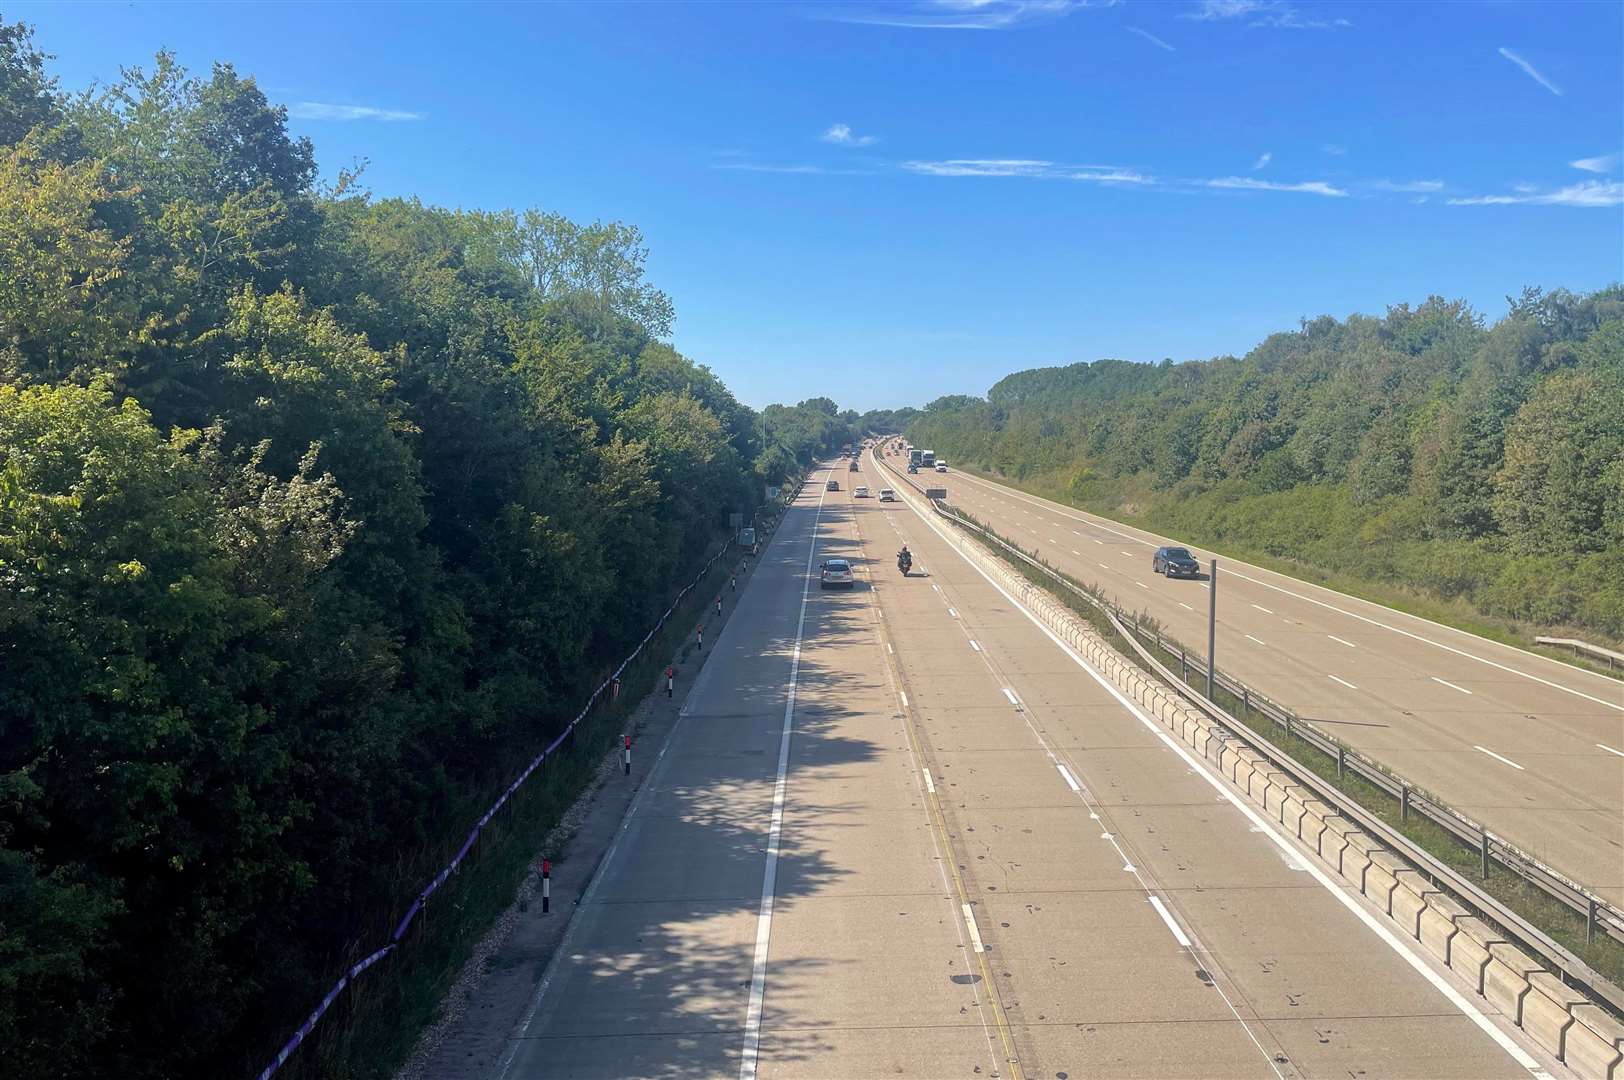 Speed restrictions on the M20 London-bound between Ashford and Maidstone have mostly been lifted